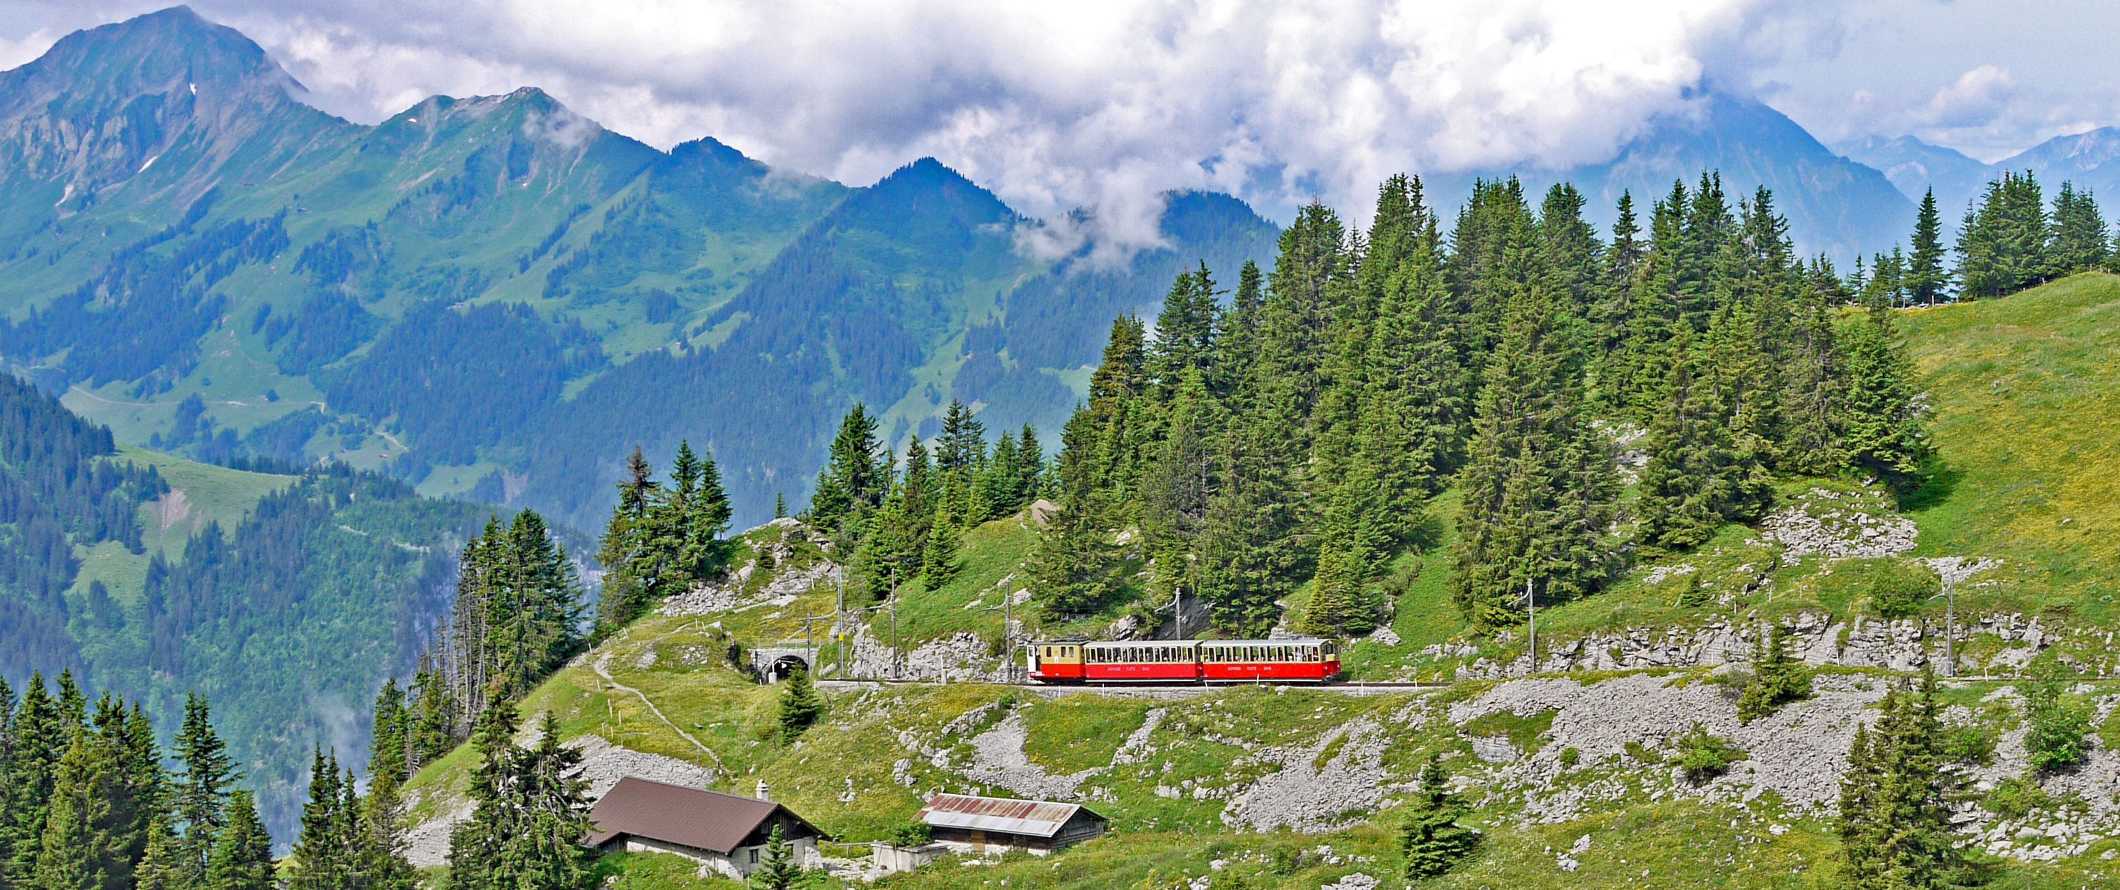 Red train climbing a dramatic incline with sharp mountain peaks in the background on the Jungfraujoch Railway in Interlaken, Switzerland